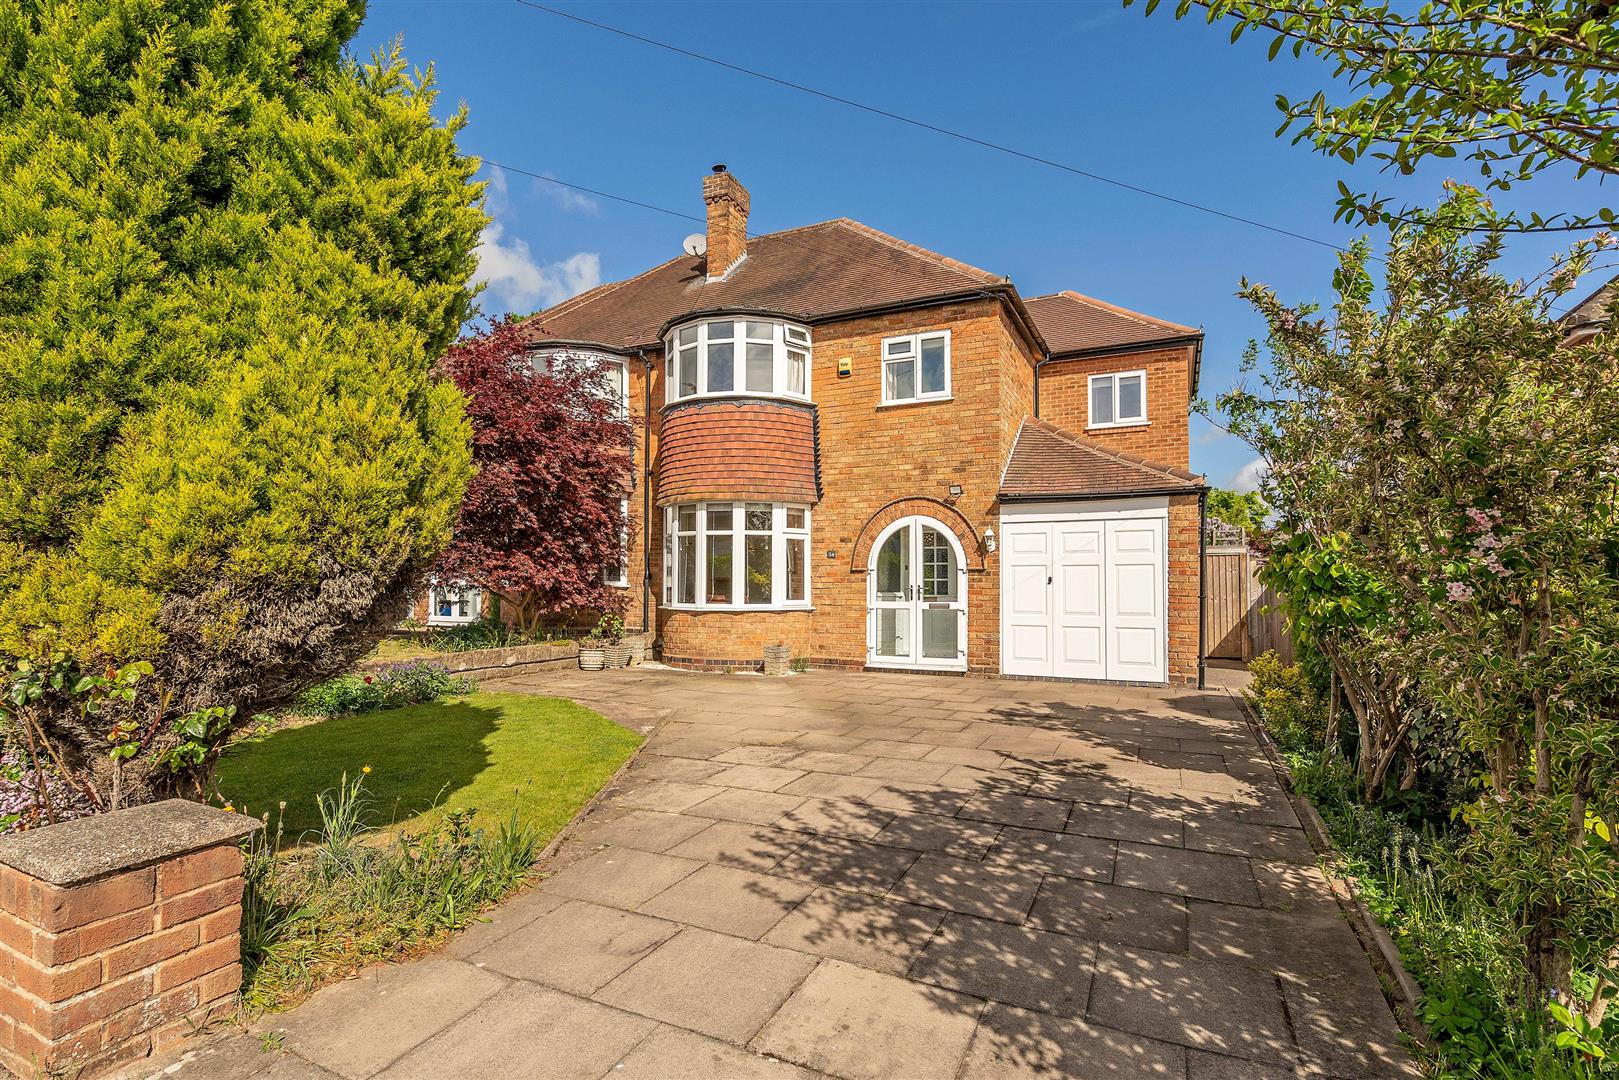 4 bed  for sale in Wroxall Road, Solihull, B91 